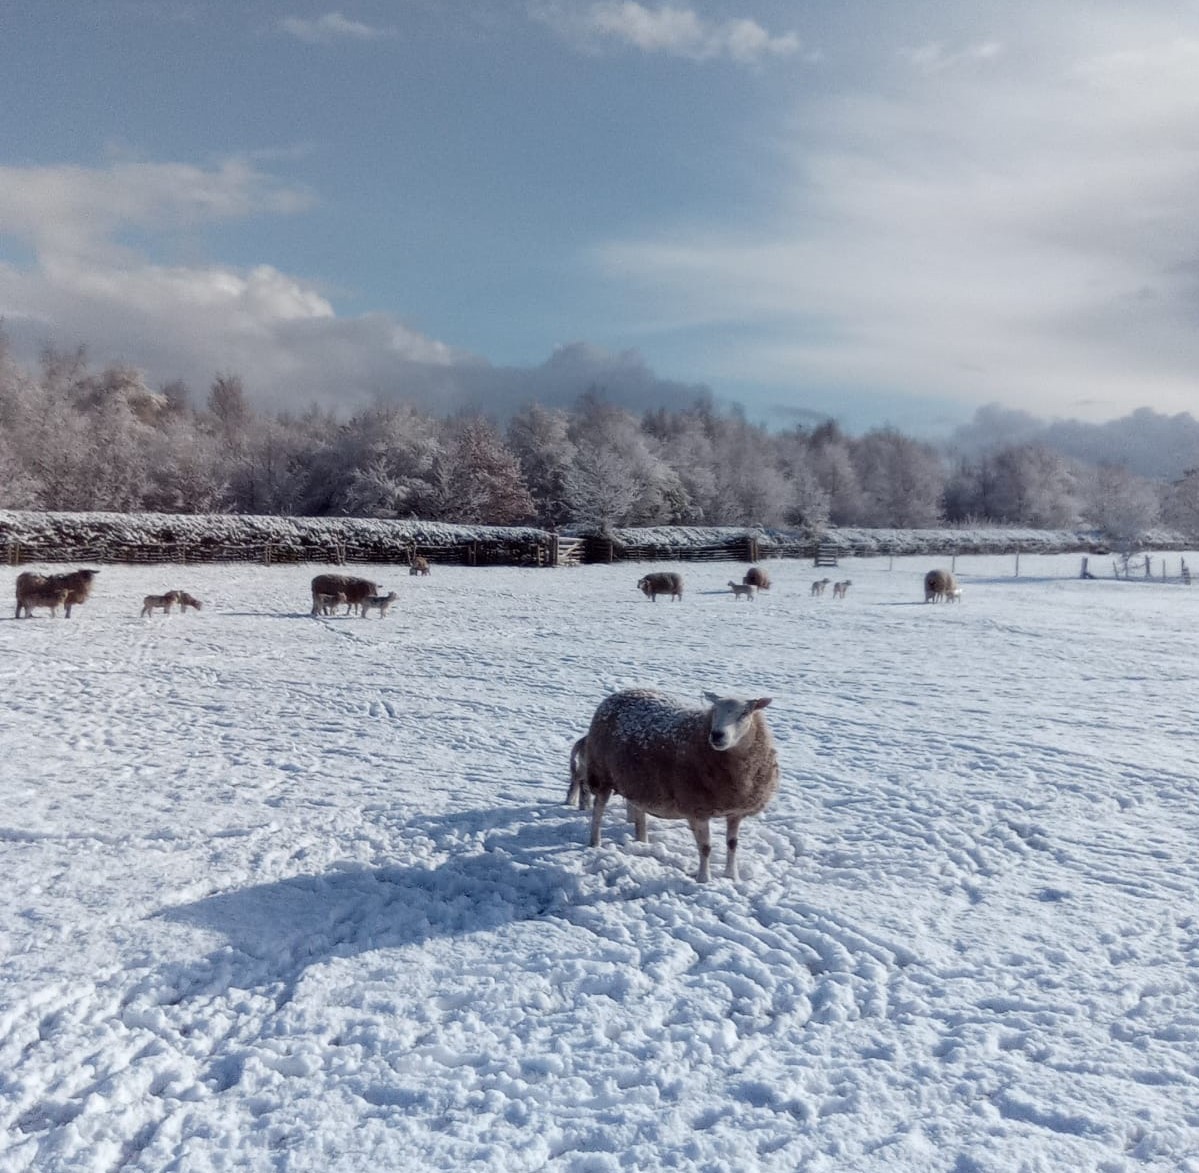 Sheep stood in a snow covered field